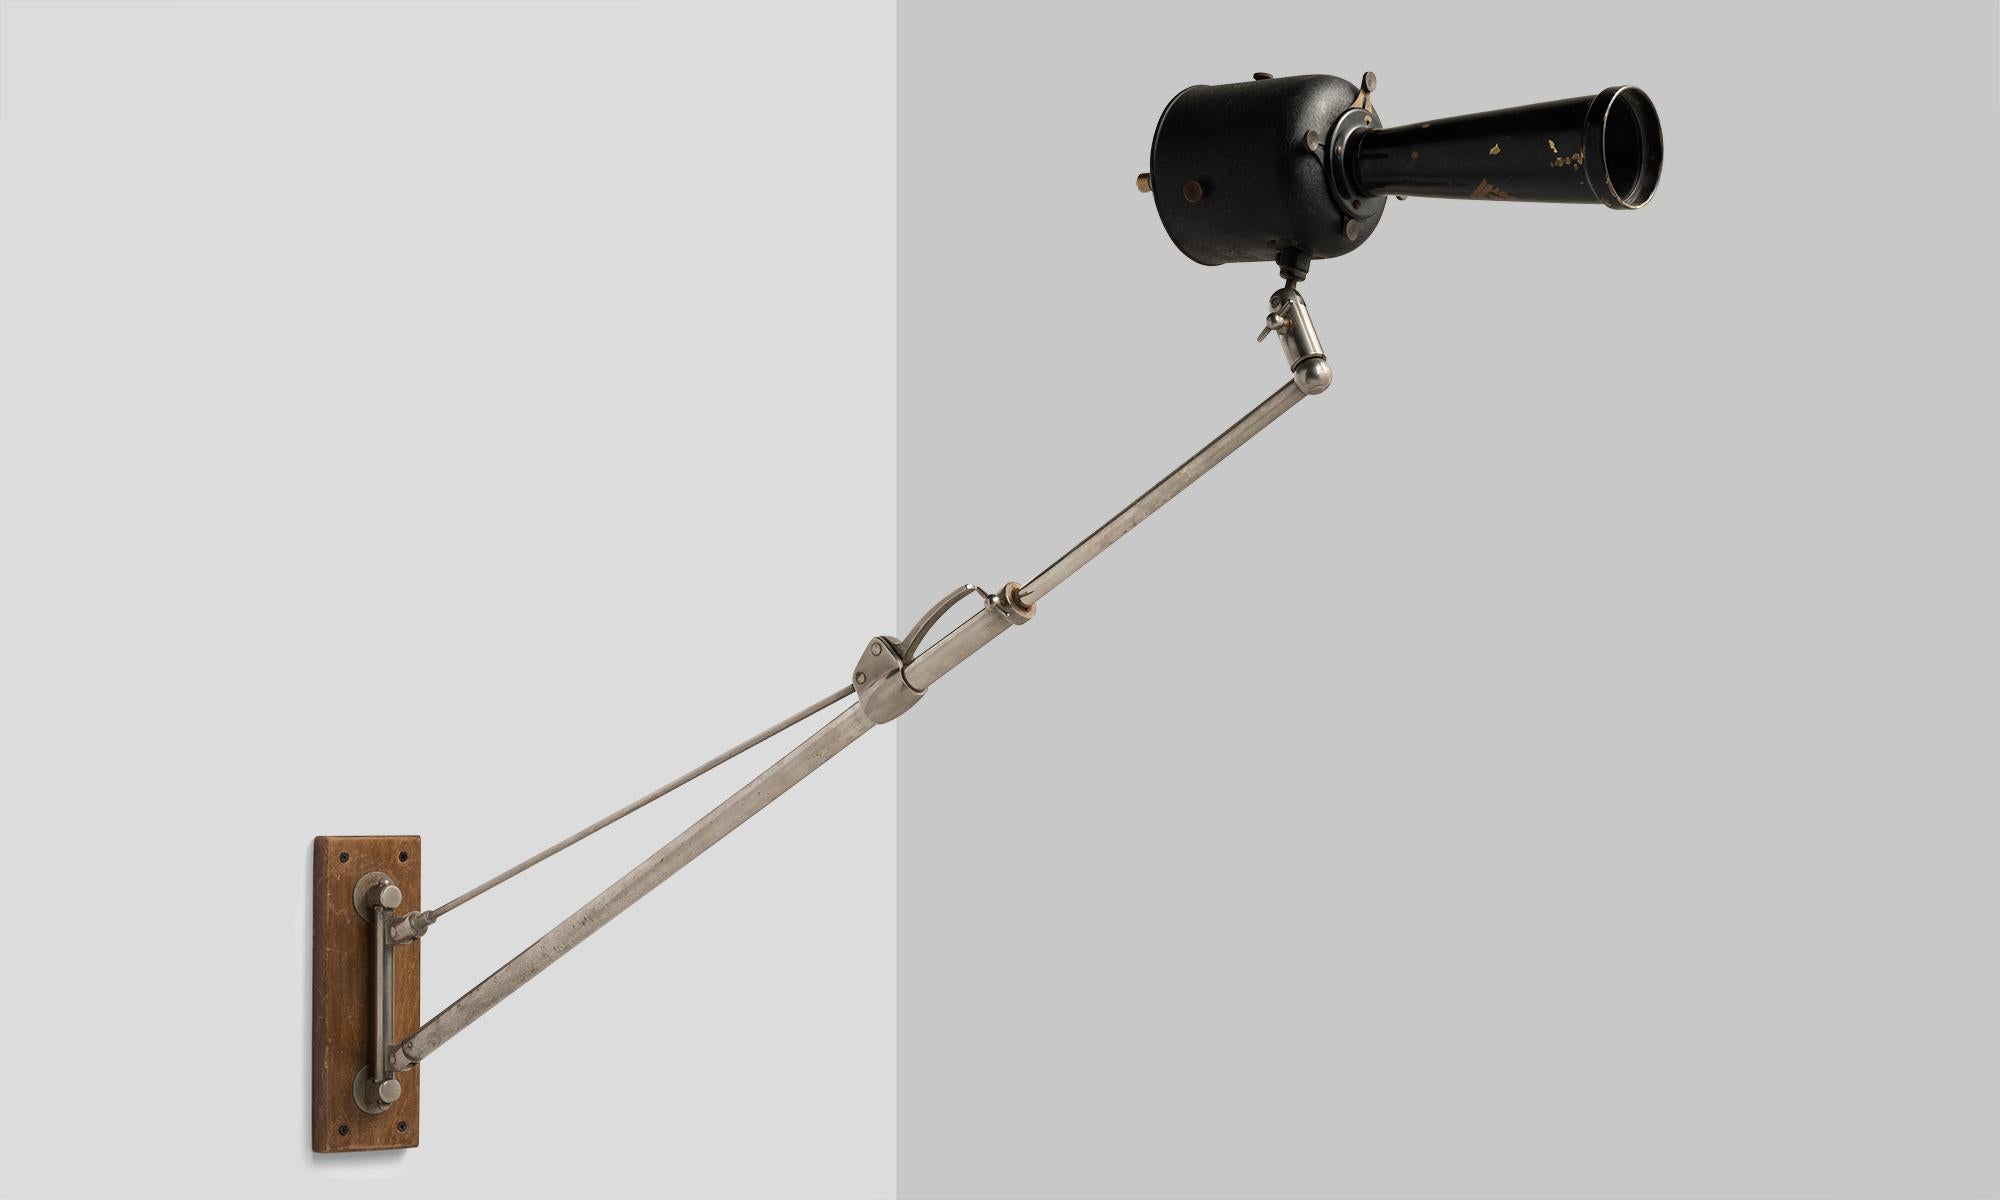 Industrial wall sconce by Reymand Freres & Cie, France, circa 1920.

Unique and rare adjustable fixture originally used in a dentists office. Not pictured is a cloth cord, which connects to the top of the light head.

